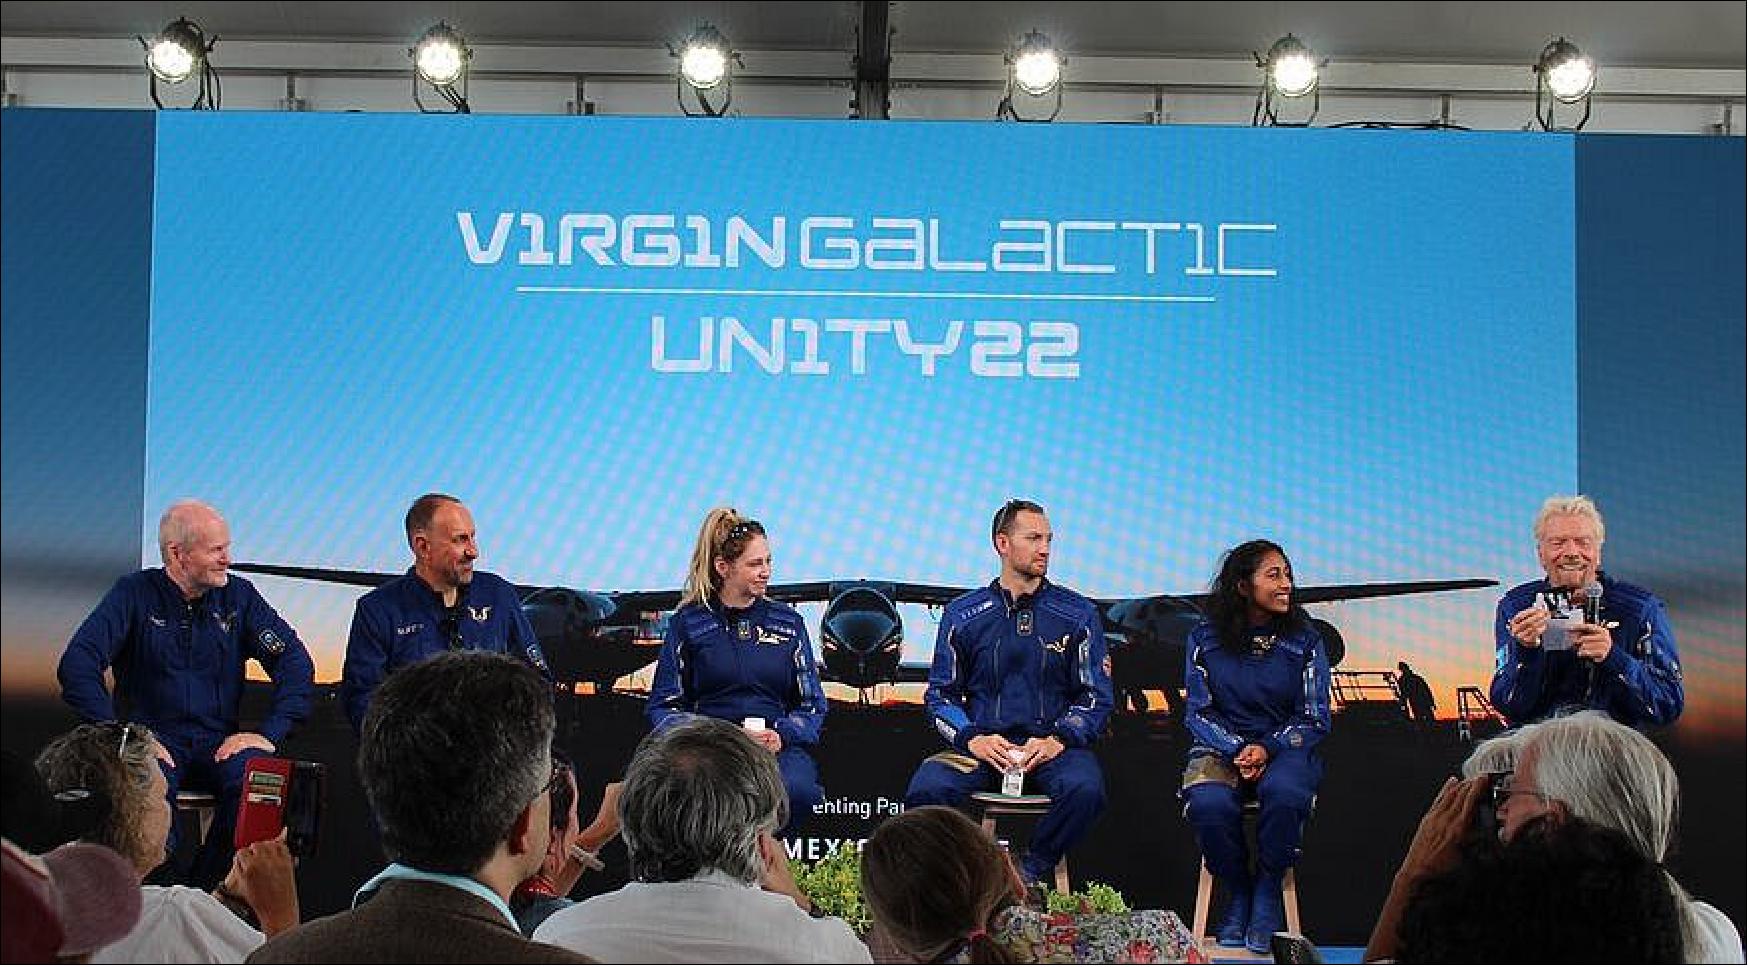 Figure 16: Richard Branson (right) discusses the July 11 SpaceShipTwo flight he was on at a post-flight briefing along with the rest of the crew (from left): Dave Mackay, Mike Masucci, Beth Moses, Colin Bennett and Sirisha Bandla (image credit: SpaceNews/Jeff Foust)